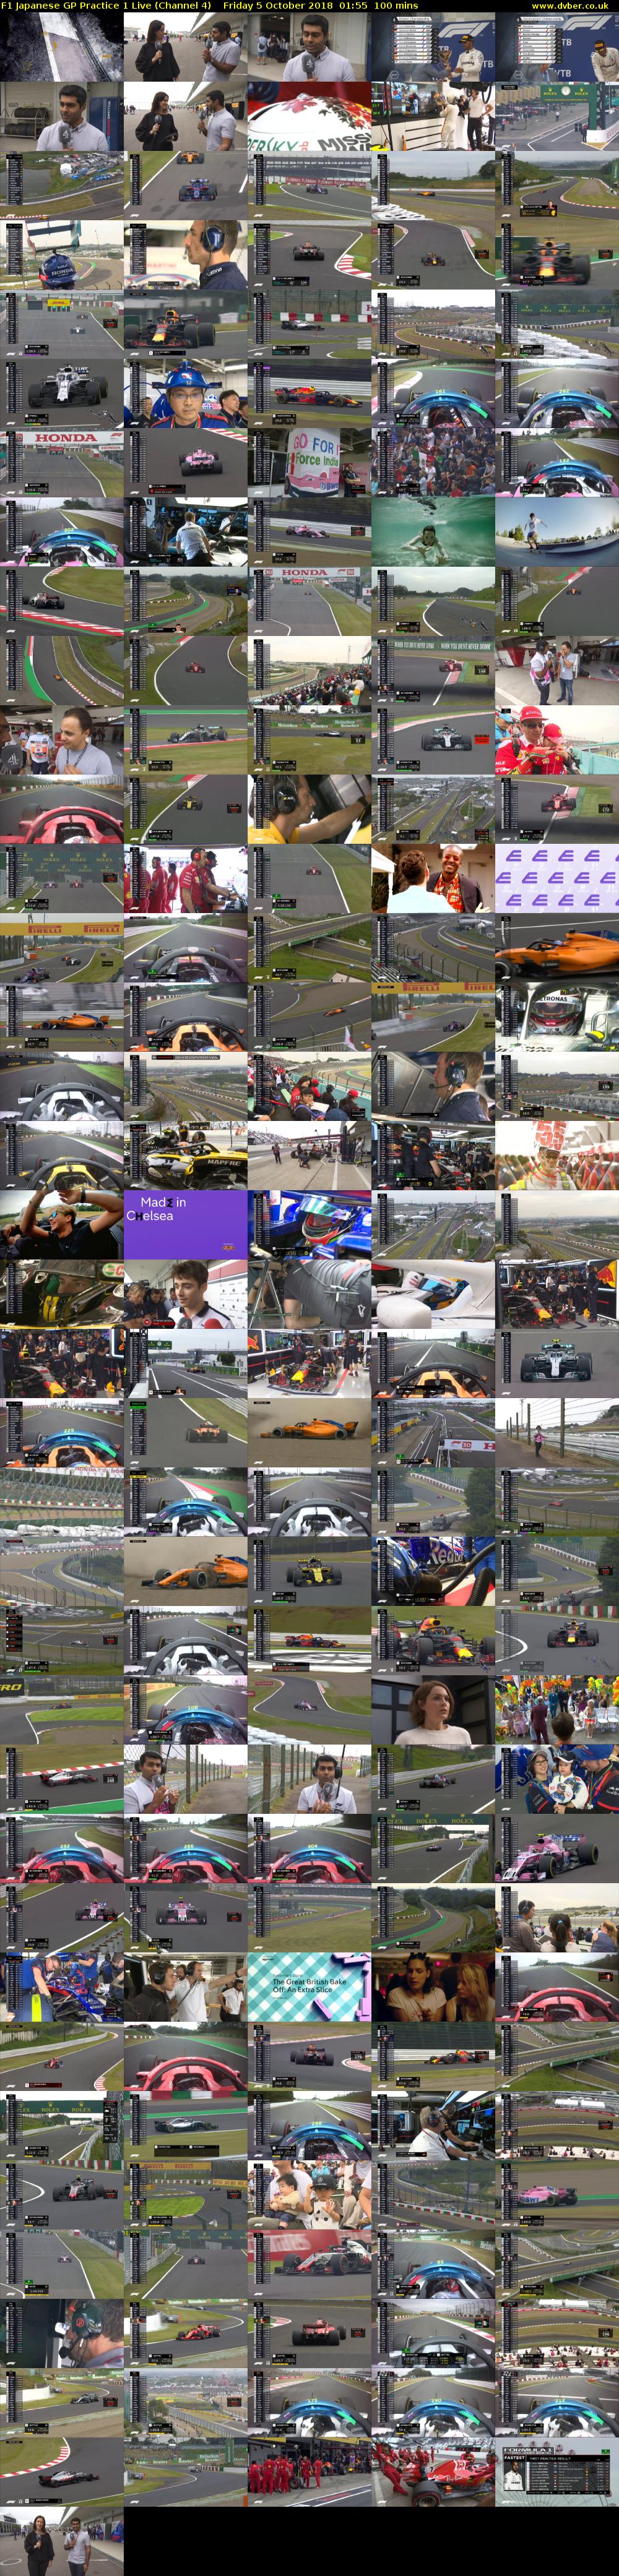 F1 Japanese GP Practice 1 Live (Channel 4) Friday 5 October 2018 01:55 - 03:35